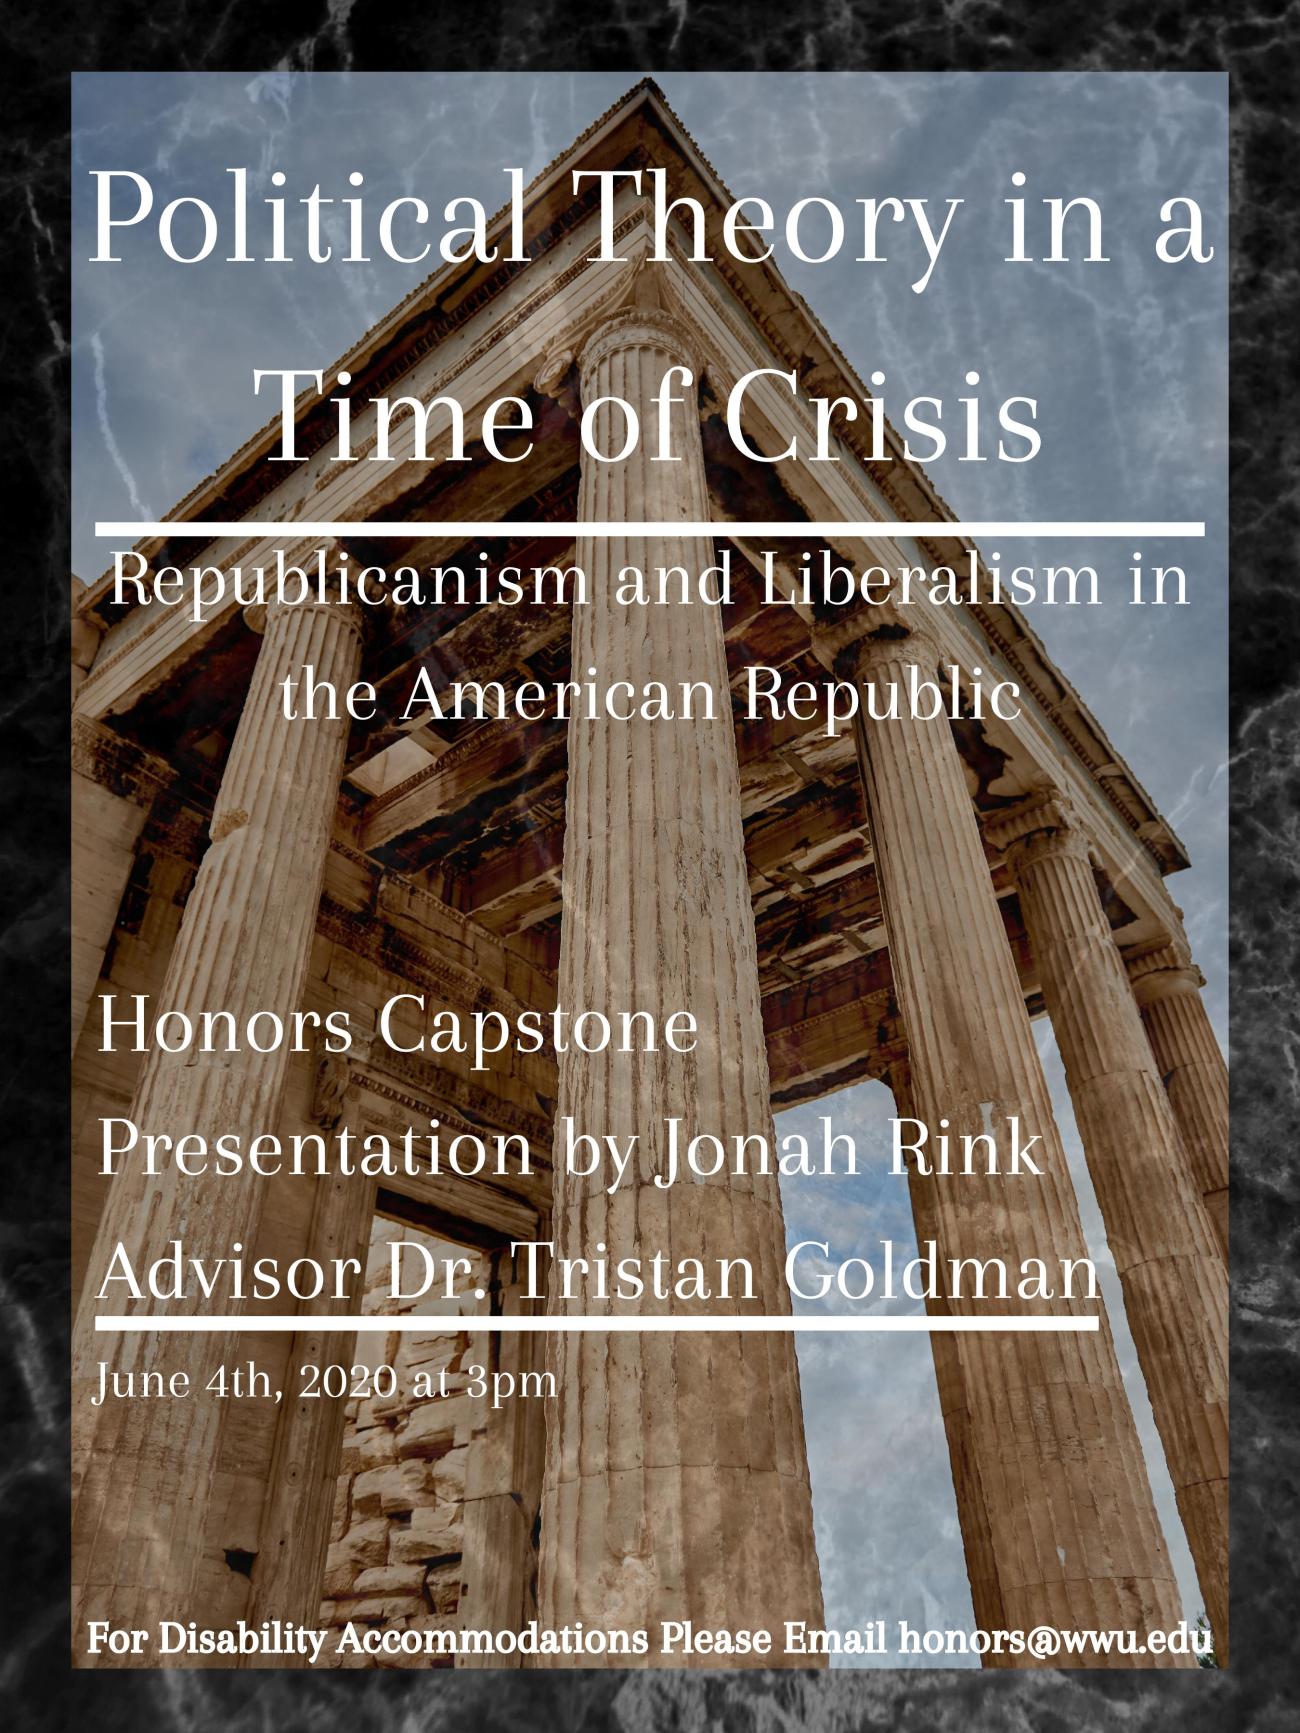 Image: Greek columns. Text reads “Political Theory in a Time of Crisis, Republicanism and Liberalism in the American Republic.” “Honors Capstone Presentation by Jonah Rink, Advisor Dr. Tristan Goldman” “For Disability Accommodations Please Email honors@wwu.edu”